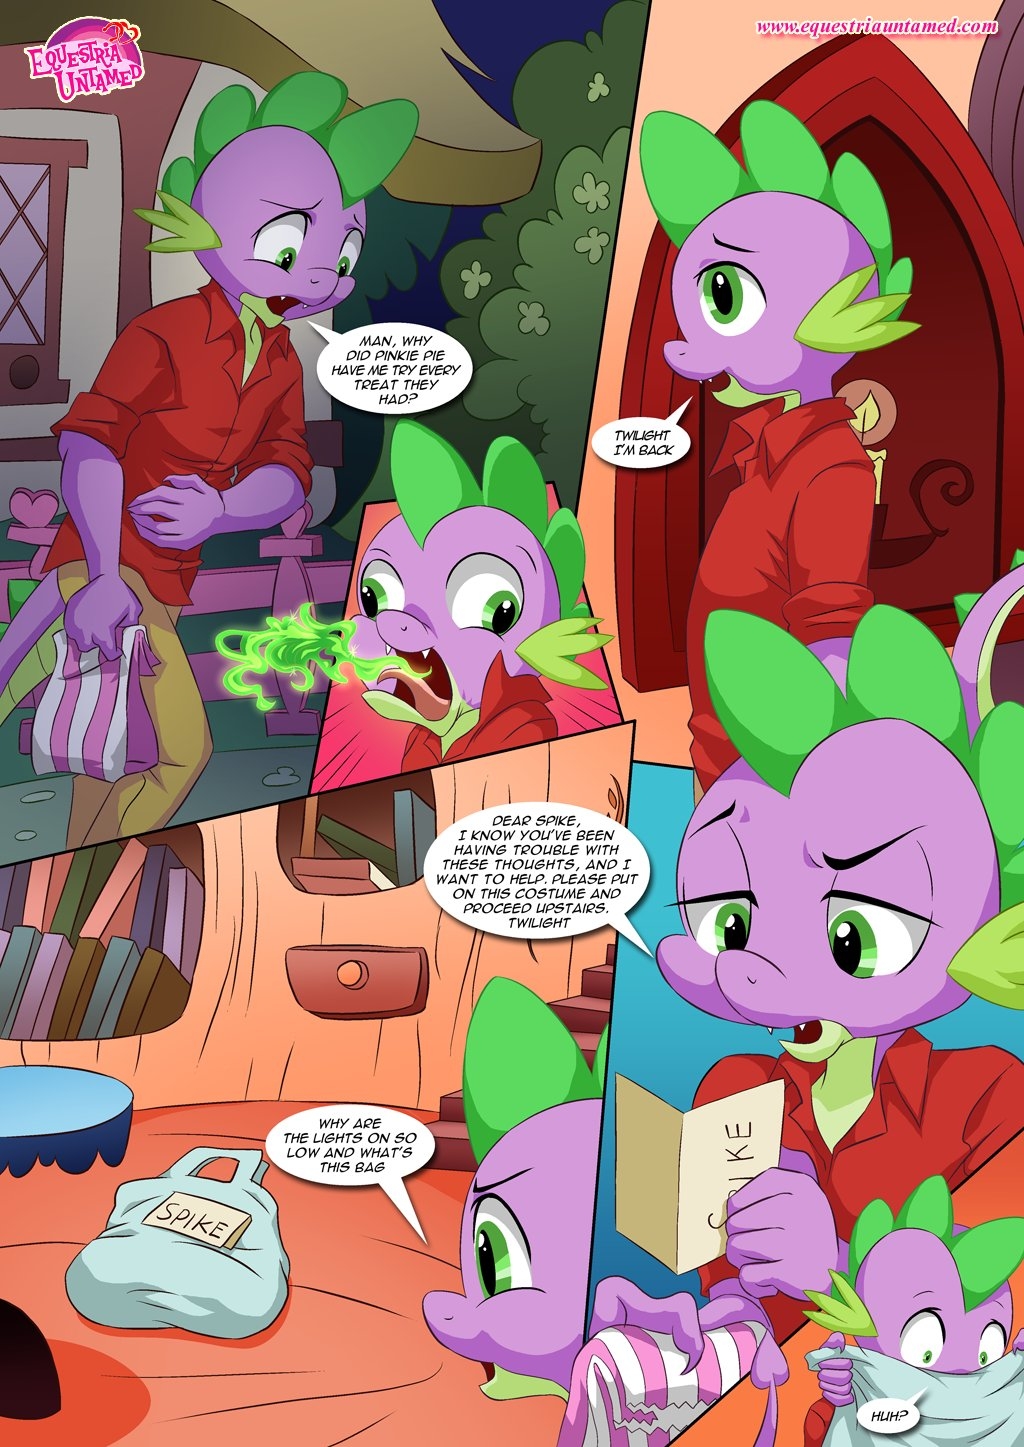 [Palcomix] Sex Ed with Miss Twilight Sparkle (My Little Pony Friendship is Magic) 13